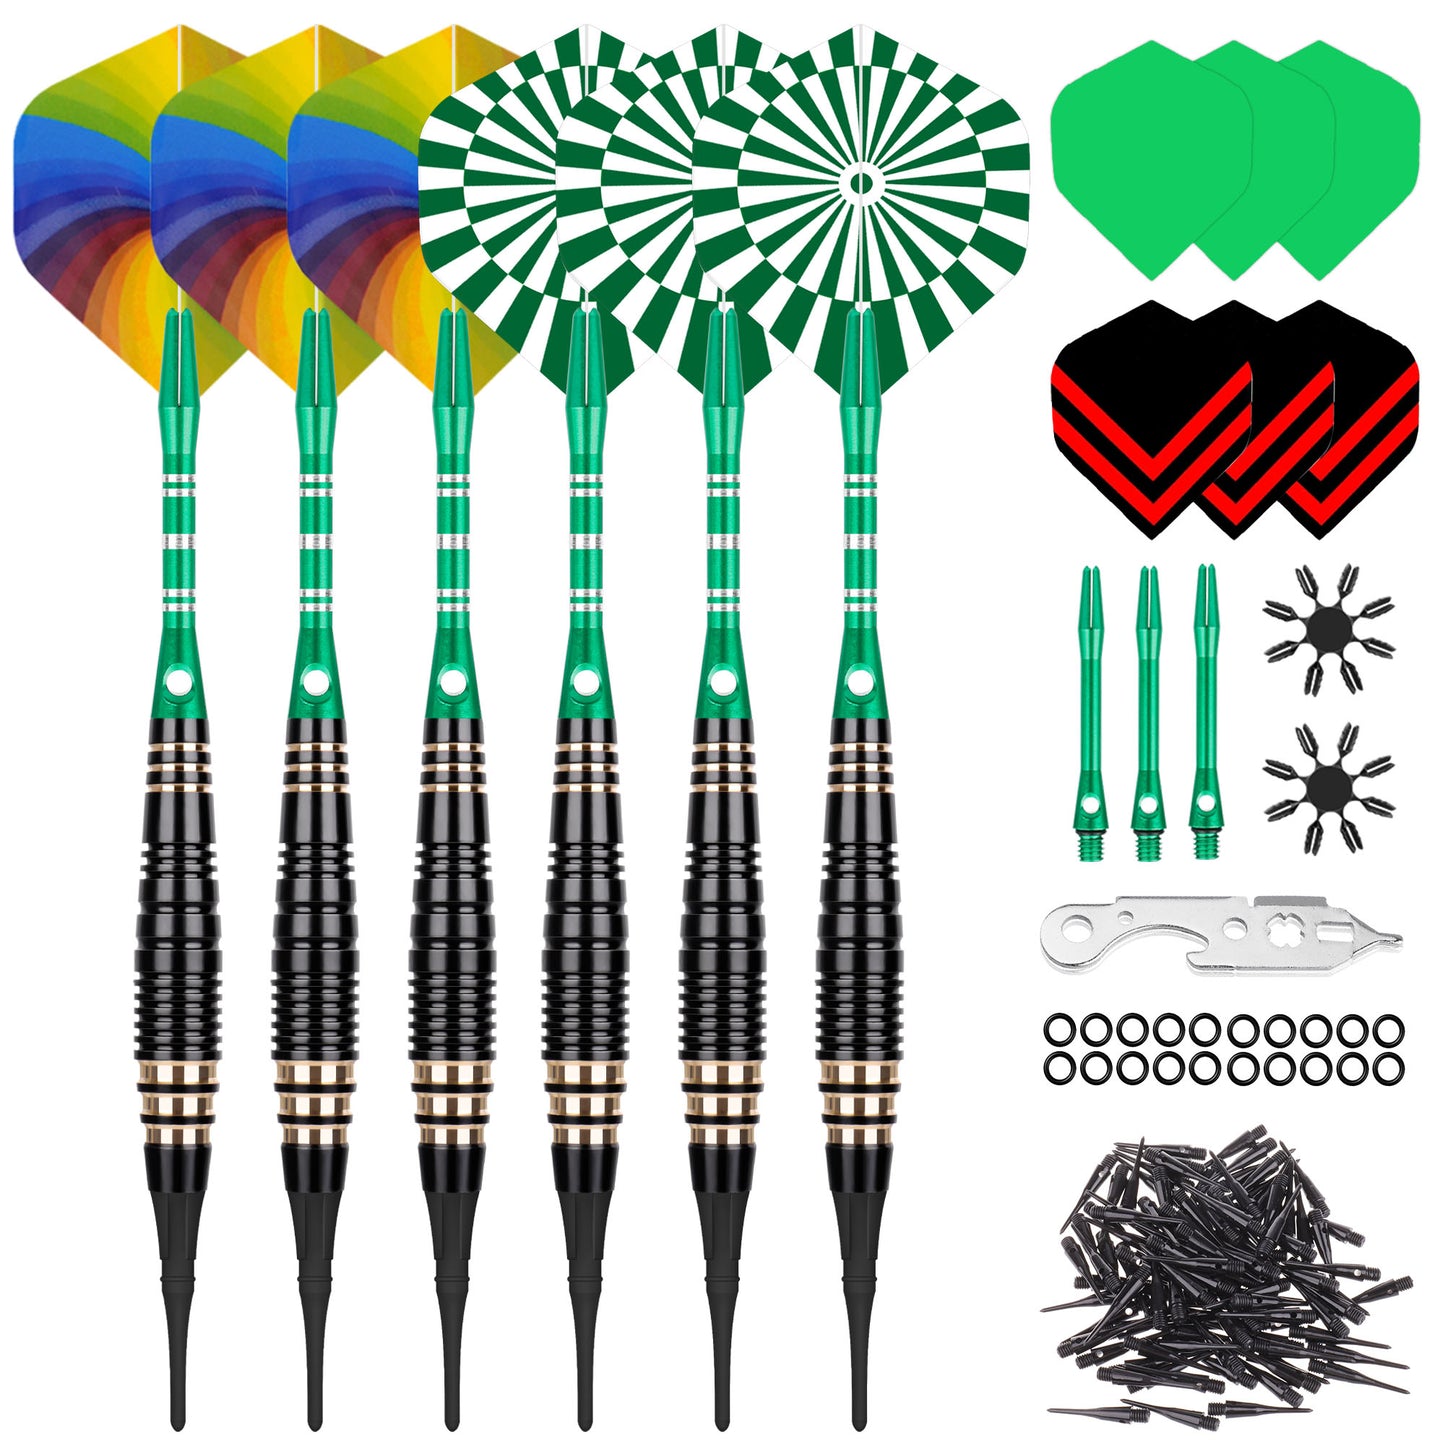 STEEL TIP DARTS BRASS SET 24G WITH CARRY CASE 6Pcs